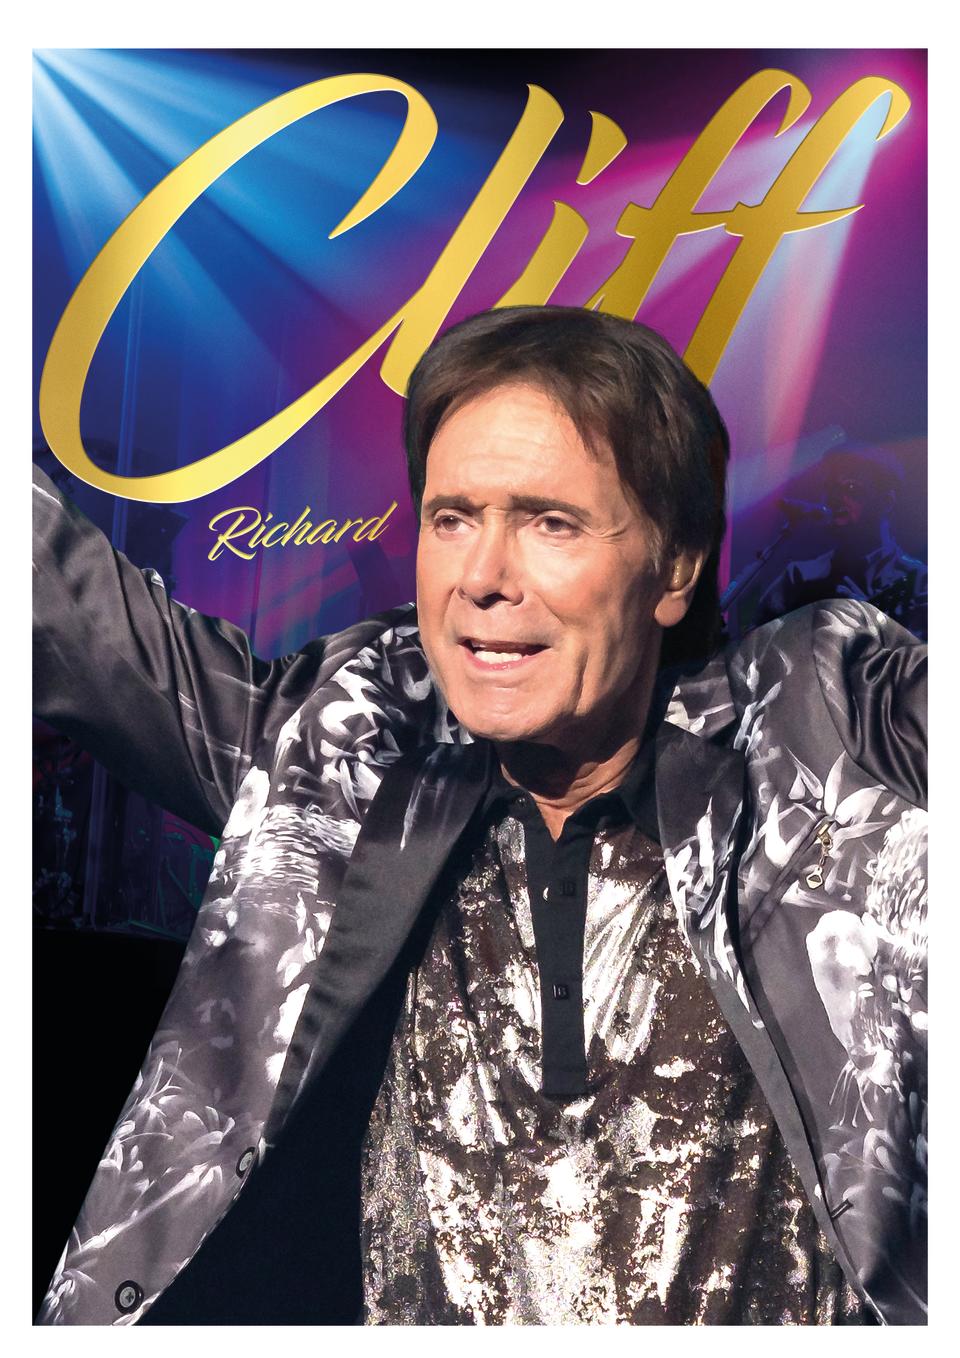 Front cover of the Cliff Richard calendar 2020 (Danilo Promotions/PA)